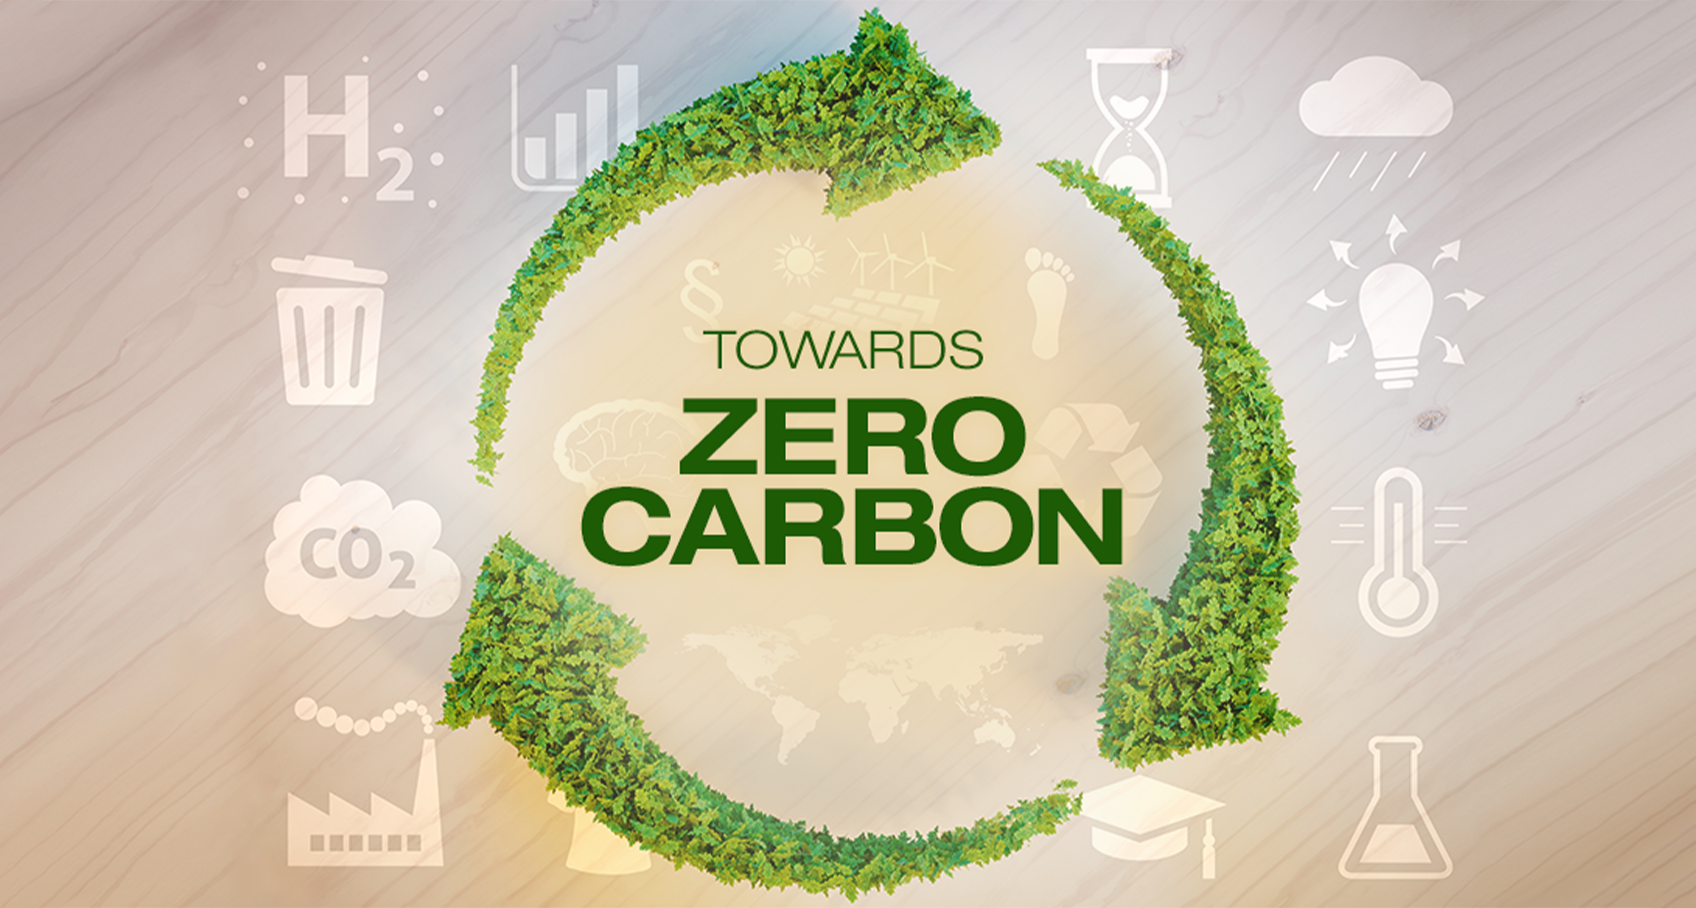 India has committed to a net zero target by 2070 but to do that it needs national-level policy targets and a firm action plan.